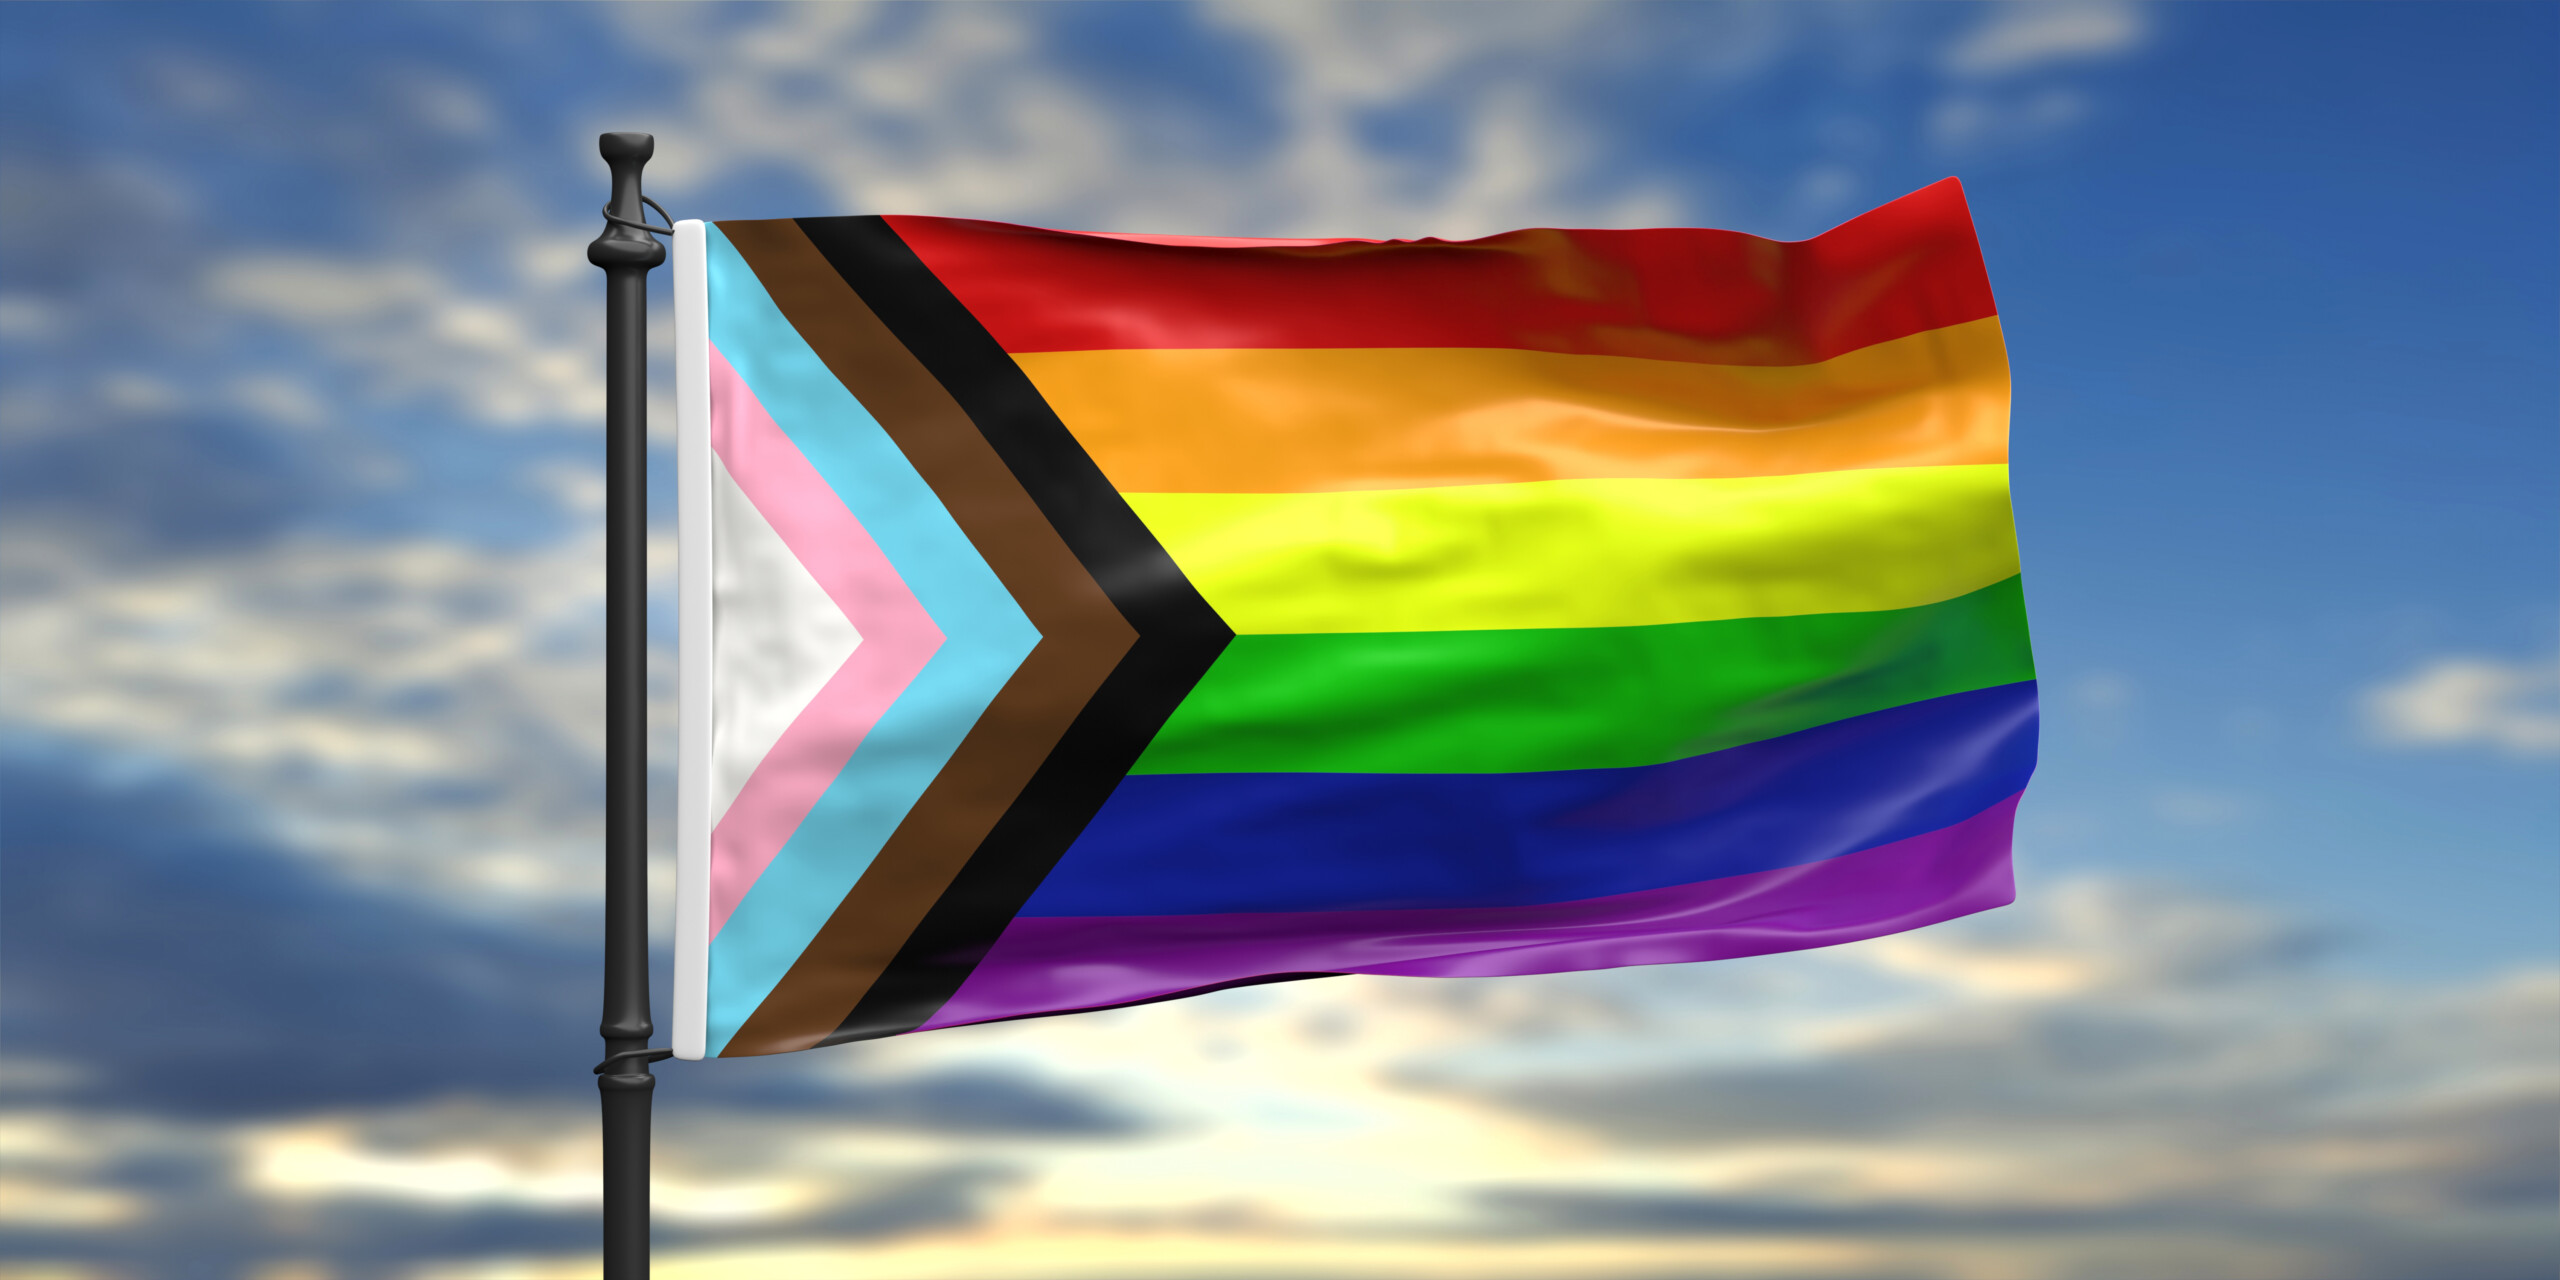 Multi-colored Pride flag flying against a blue sky.